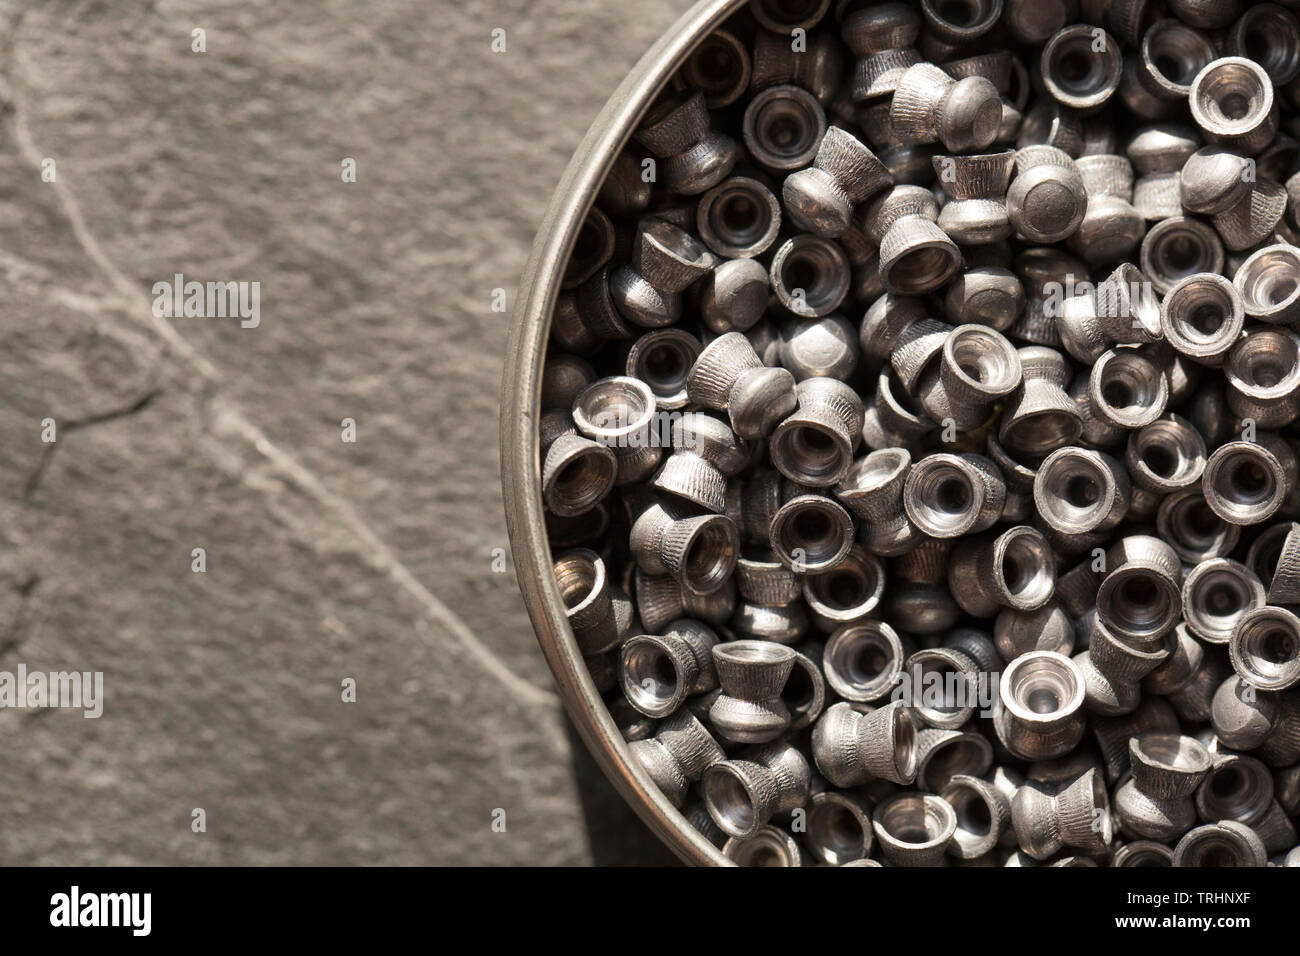 A tin of lead .22 calibre airgun pellets on a dark stone background that can be used in either air rifles or air pistols. England UK GB Stock Photo